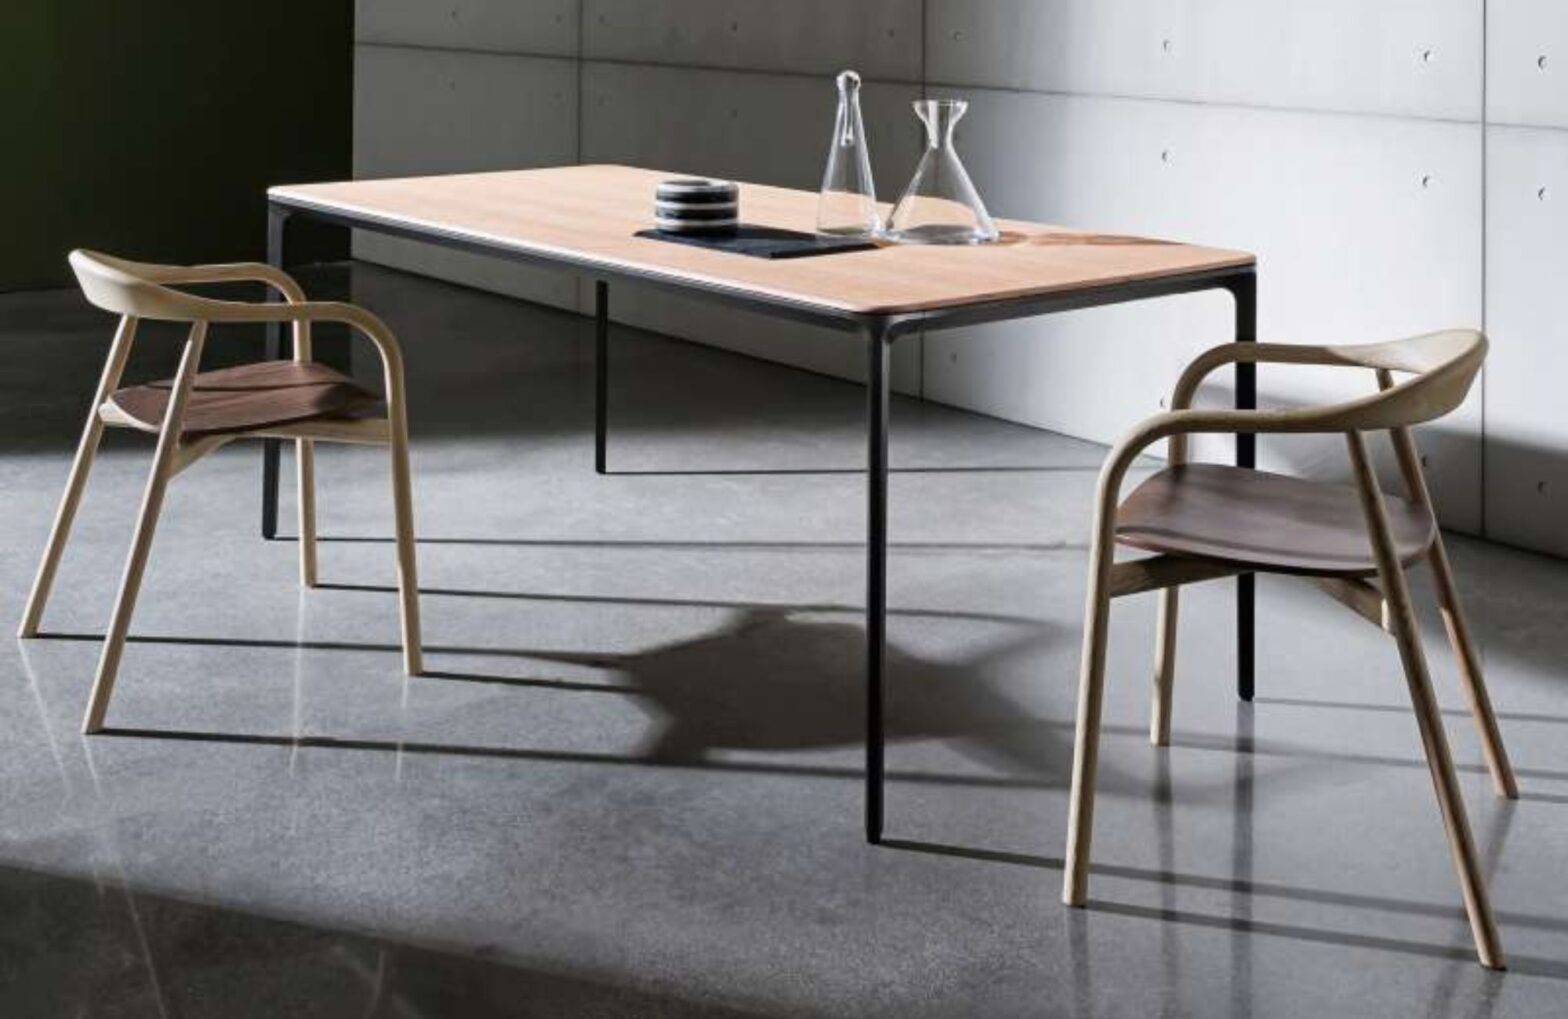 4 Pieds : mobilier personnalisable made in France